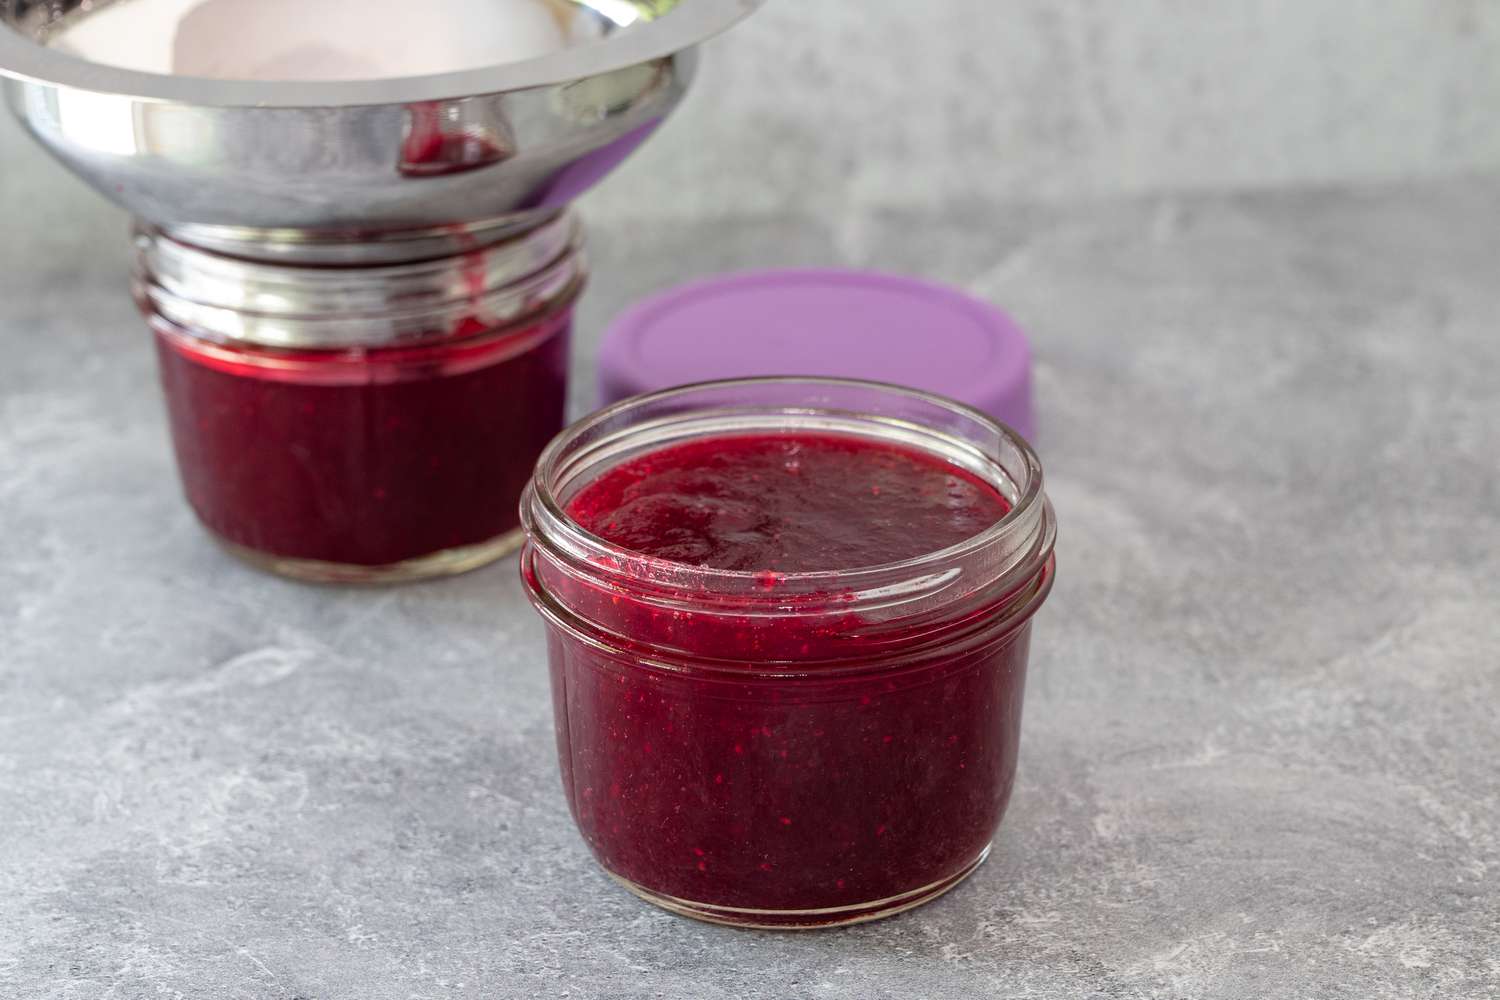 pour the homemade cranberry sauce into jars